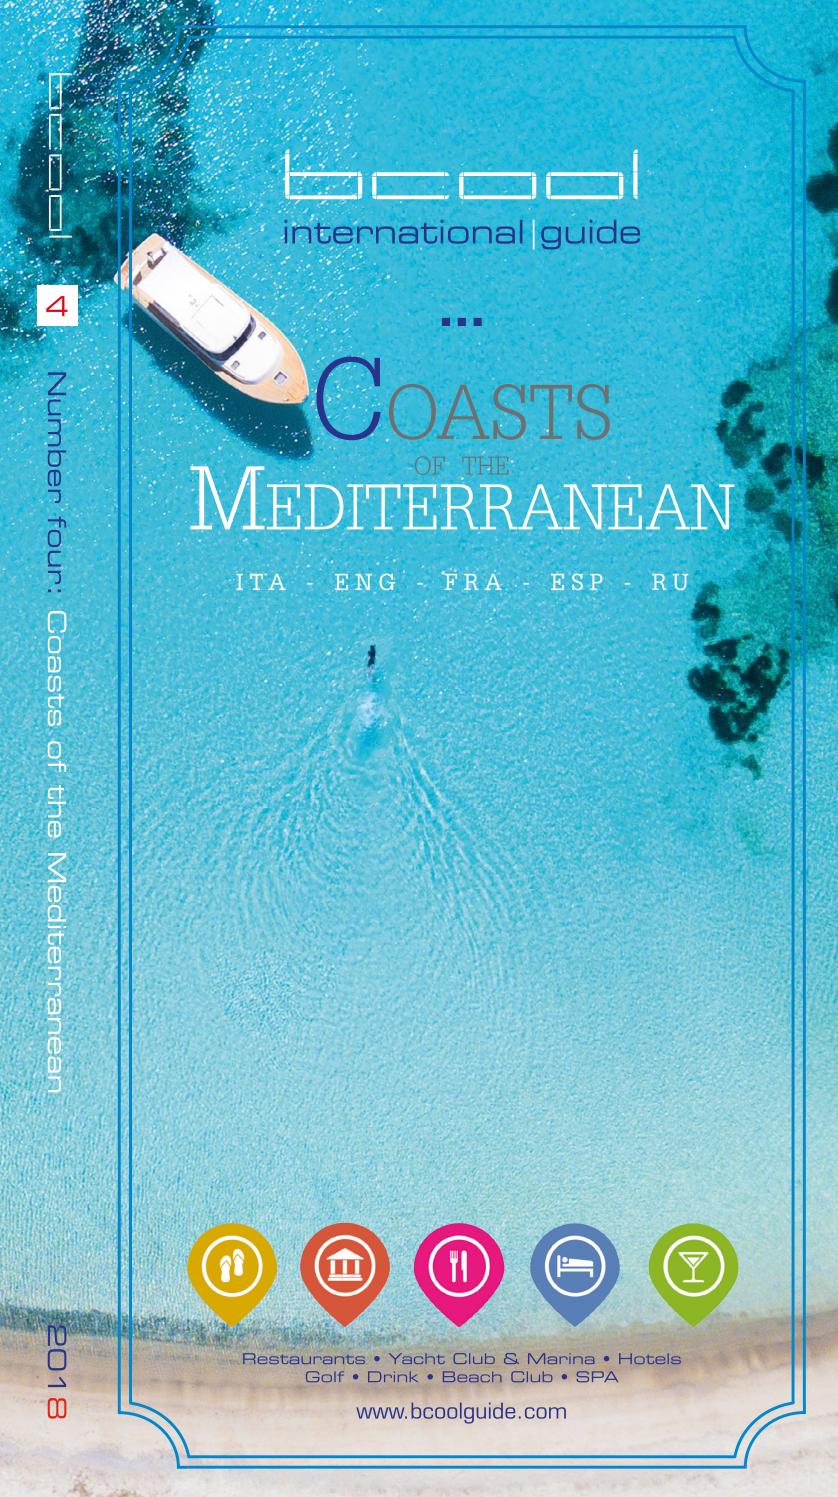 Table De Jardin Bois Génial 2018 Bcool Guide "coasts Of the Mediterrean" by Bcool City